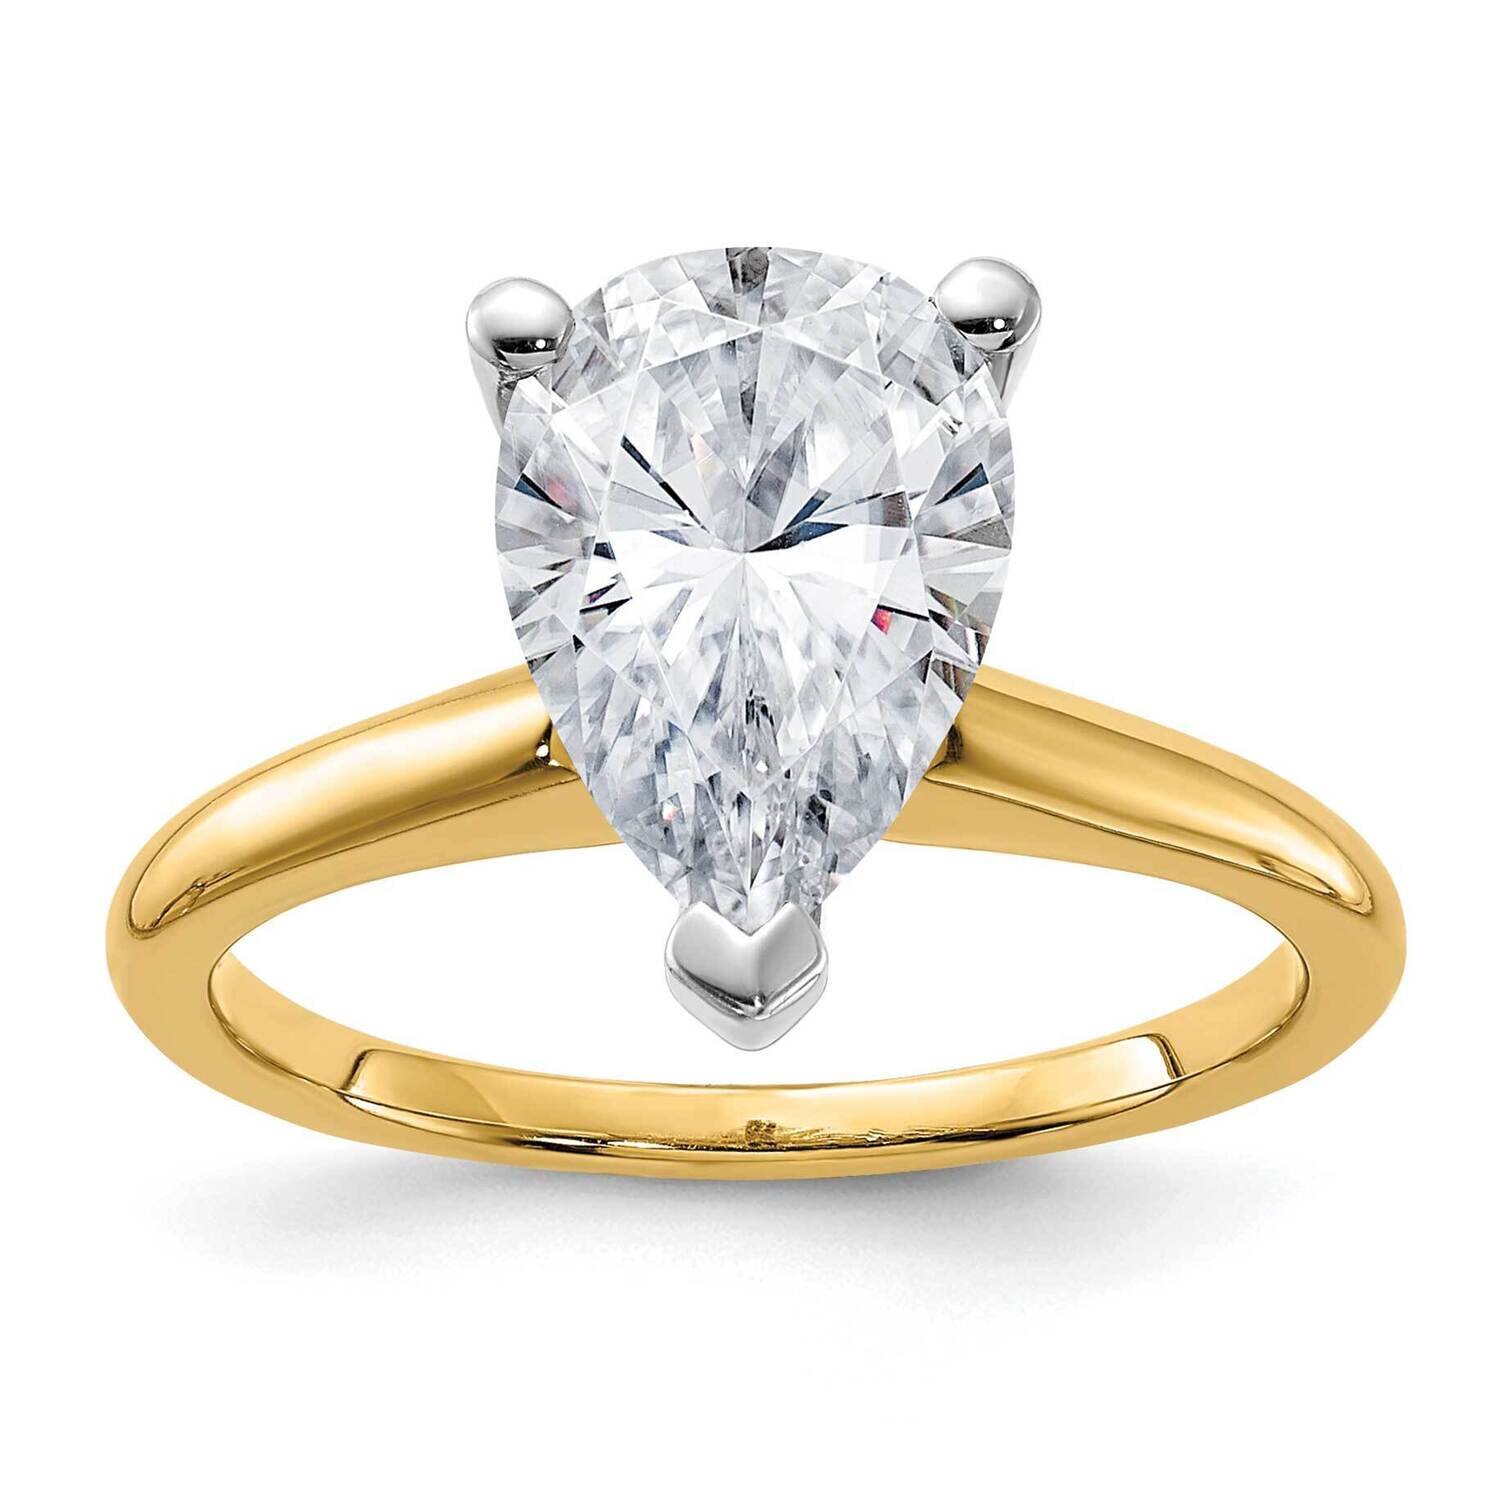 3 1/2ct. G H I True Light Pear Moissanite Solitaire Ring 14k Two Tone Gold RM5965P-300-9MT